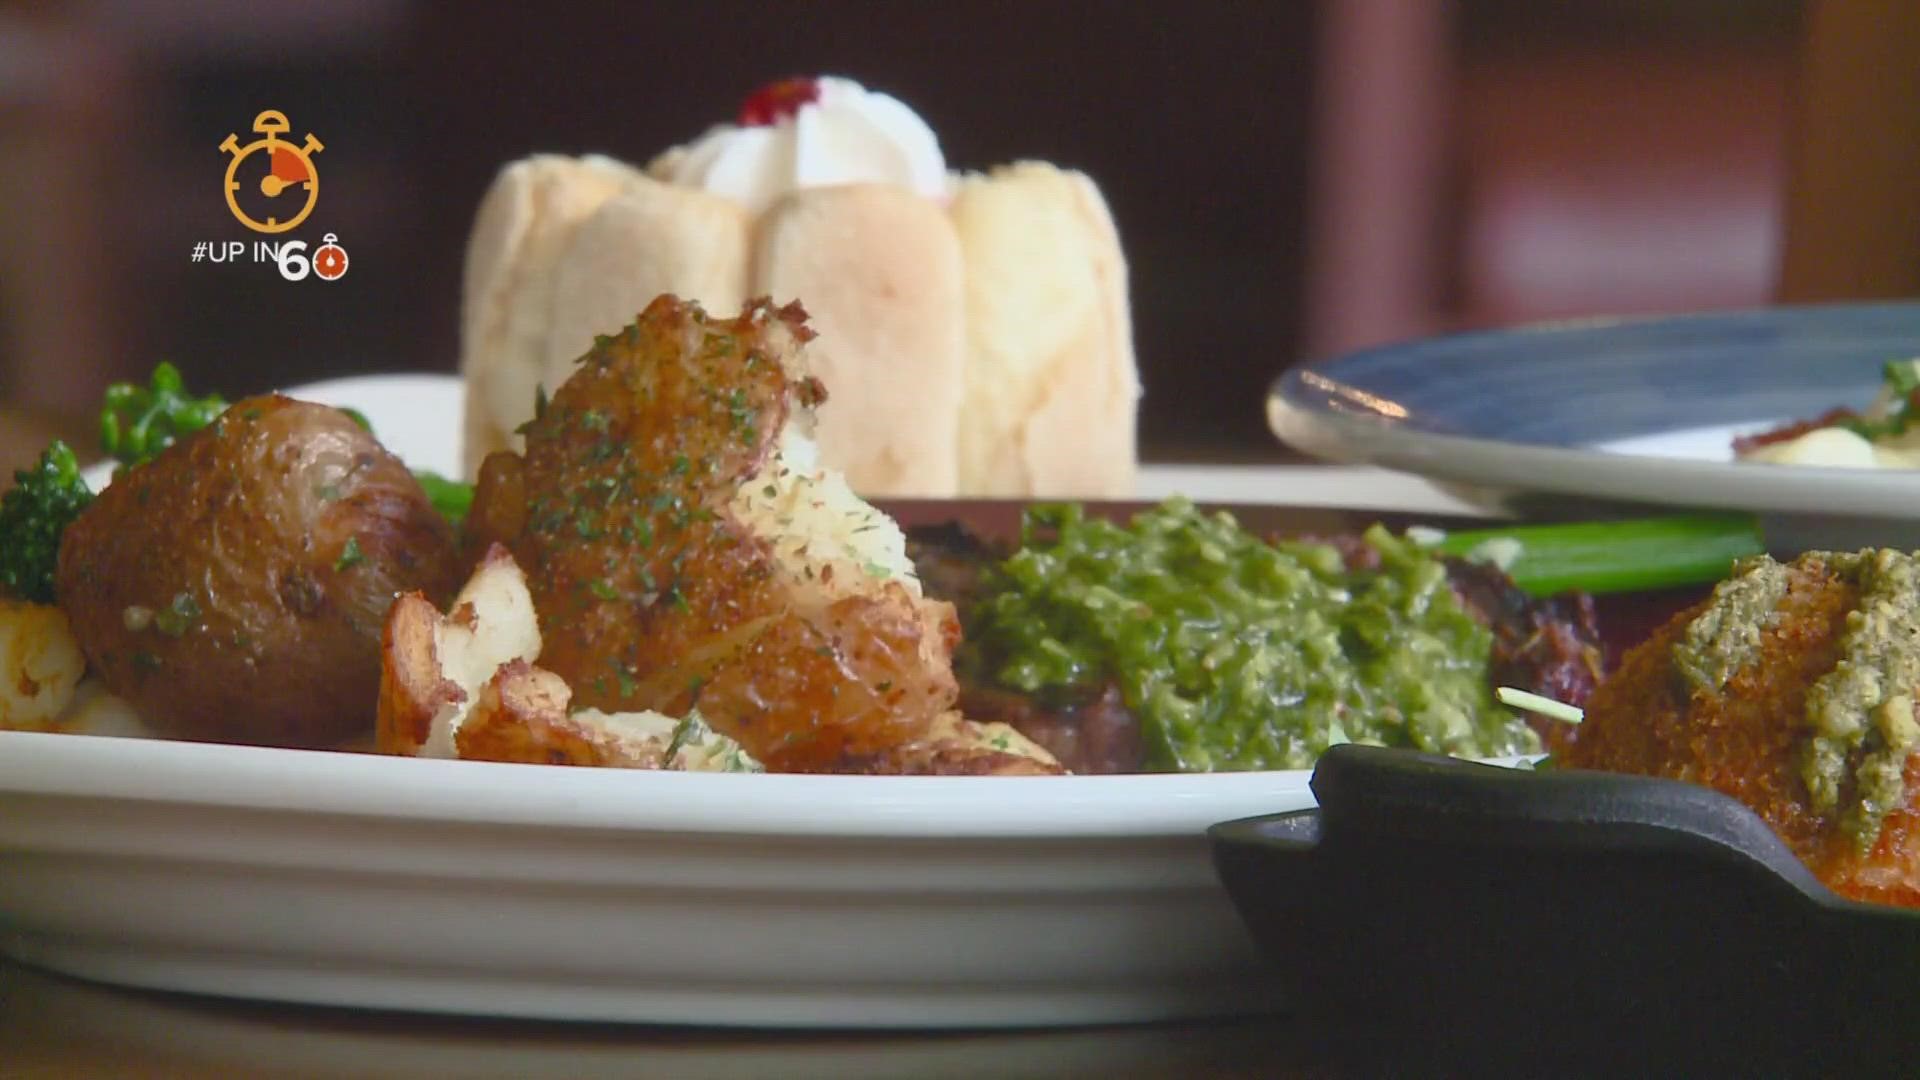 Chinook restaurant at the Coeur d'Alene Casino brings a rustic feel with high-end food.